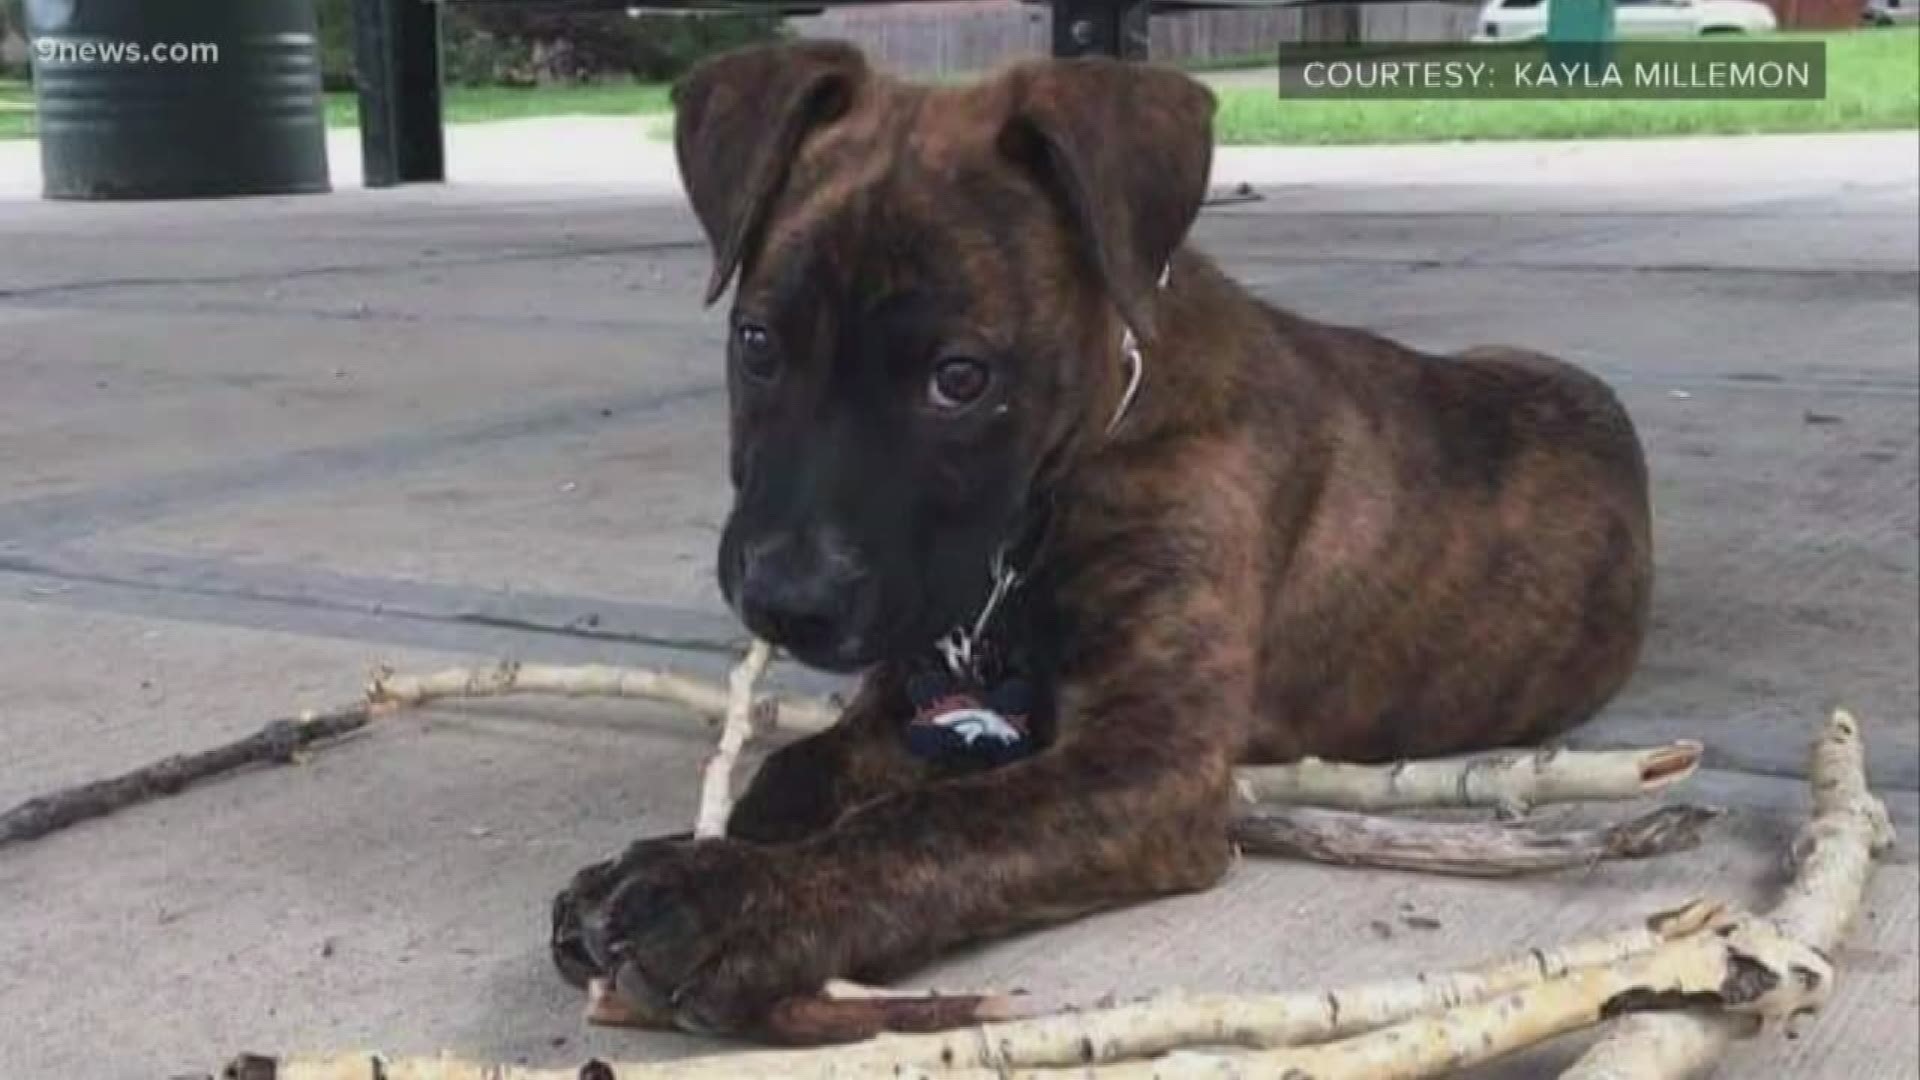 Veterinarians suspect blue-green algae may be to blame for the dog's death. The owner hopes her family's tragedy serves as a warning to other families.